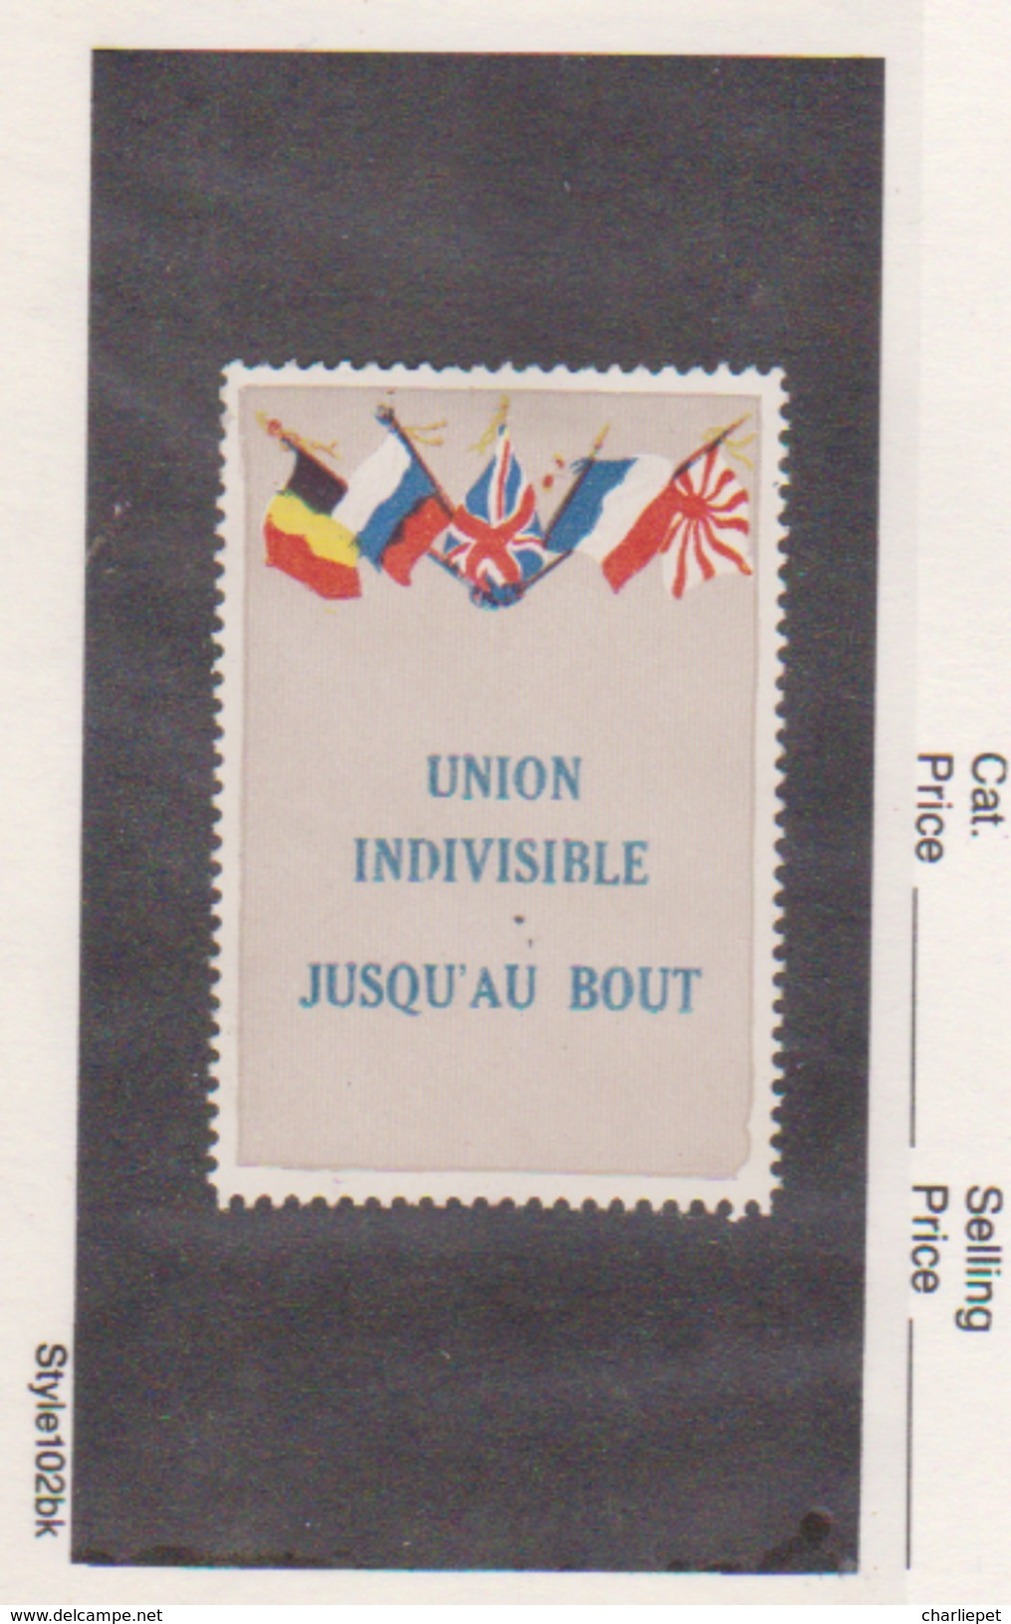 France WWI 5 Flags Union Indivisible Vignette  Military Heritage Poster Stamp - Military Heritage